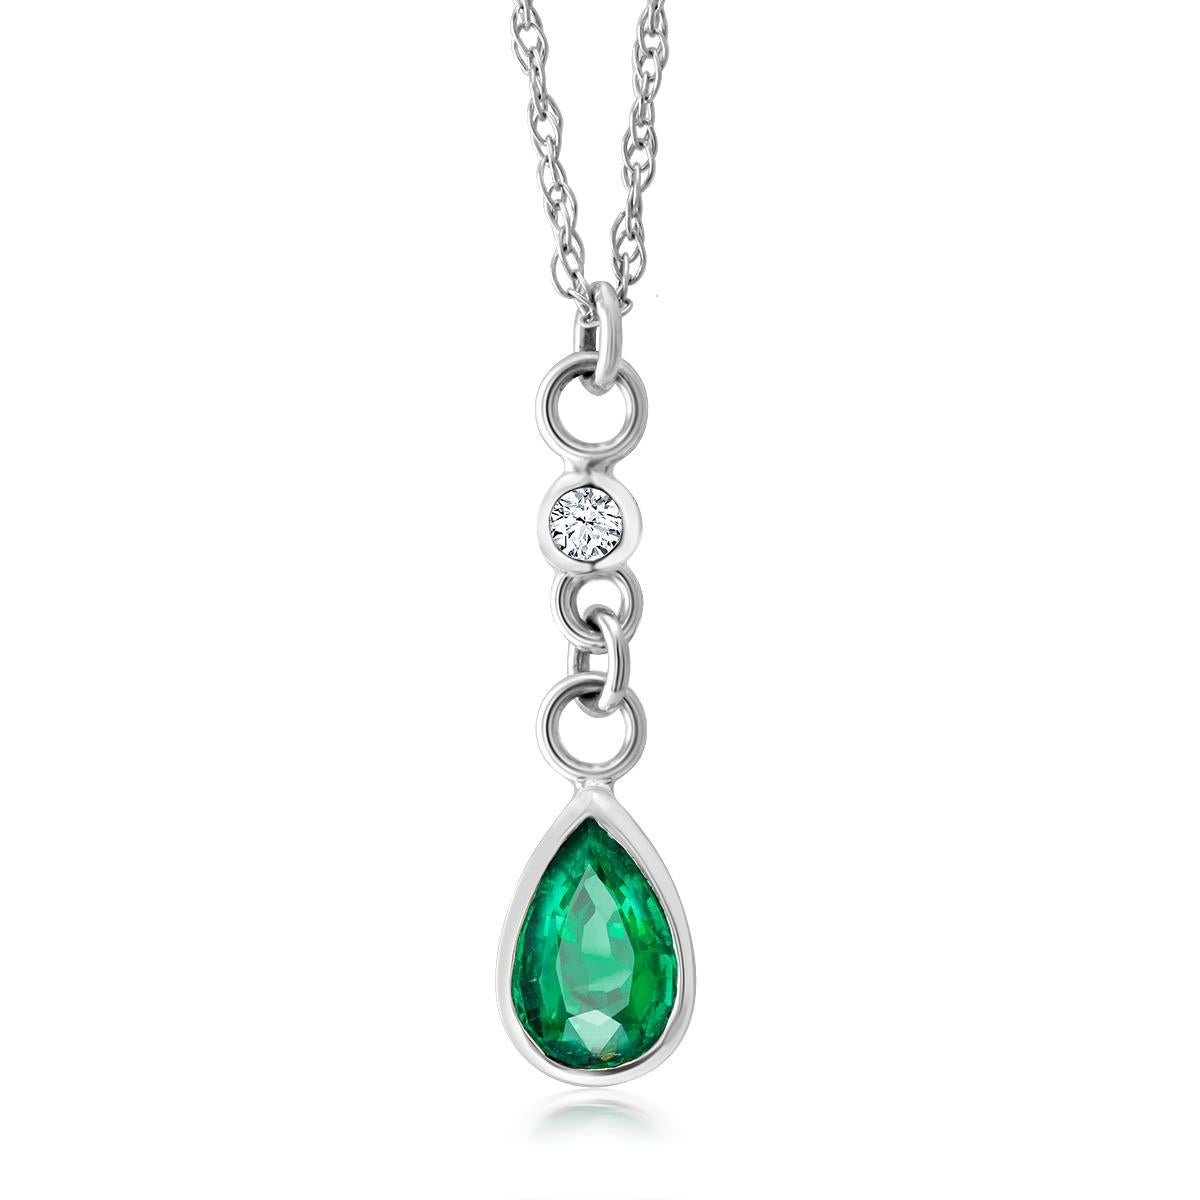 Modernist White Gold Pear Shape Emerald and Diamond Pendant Necklace Weighing 0.84 Carat